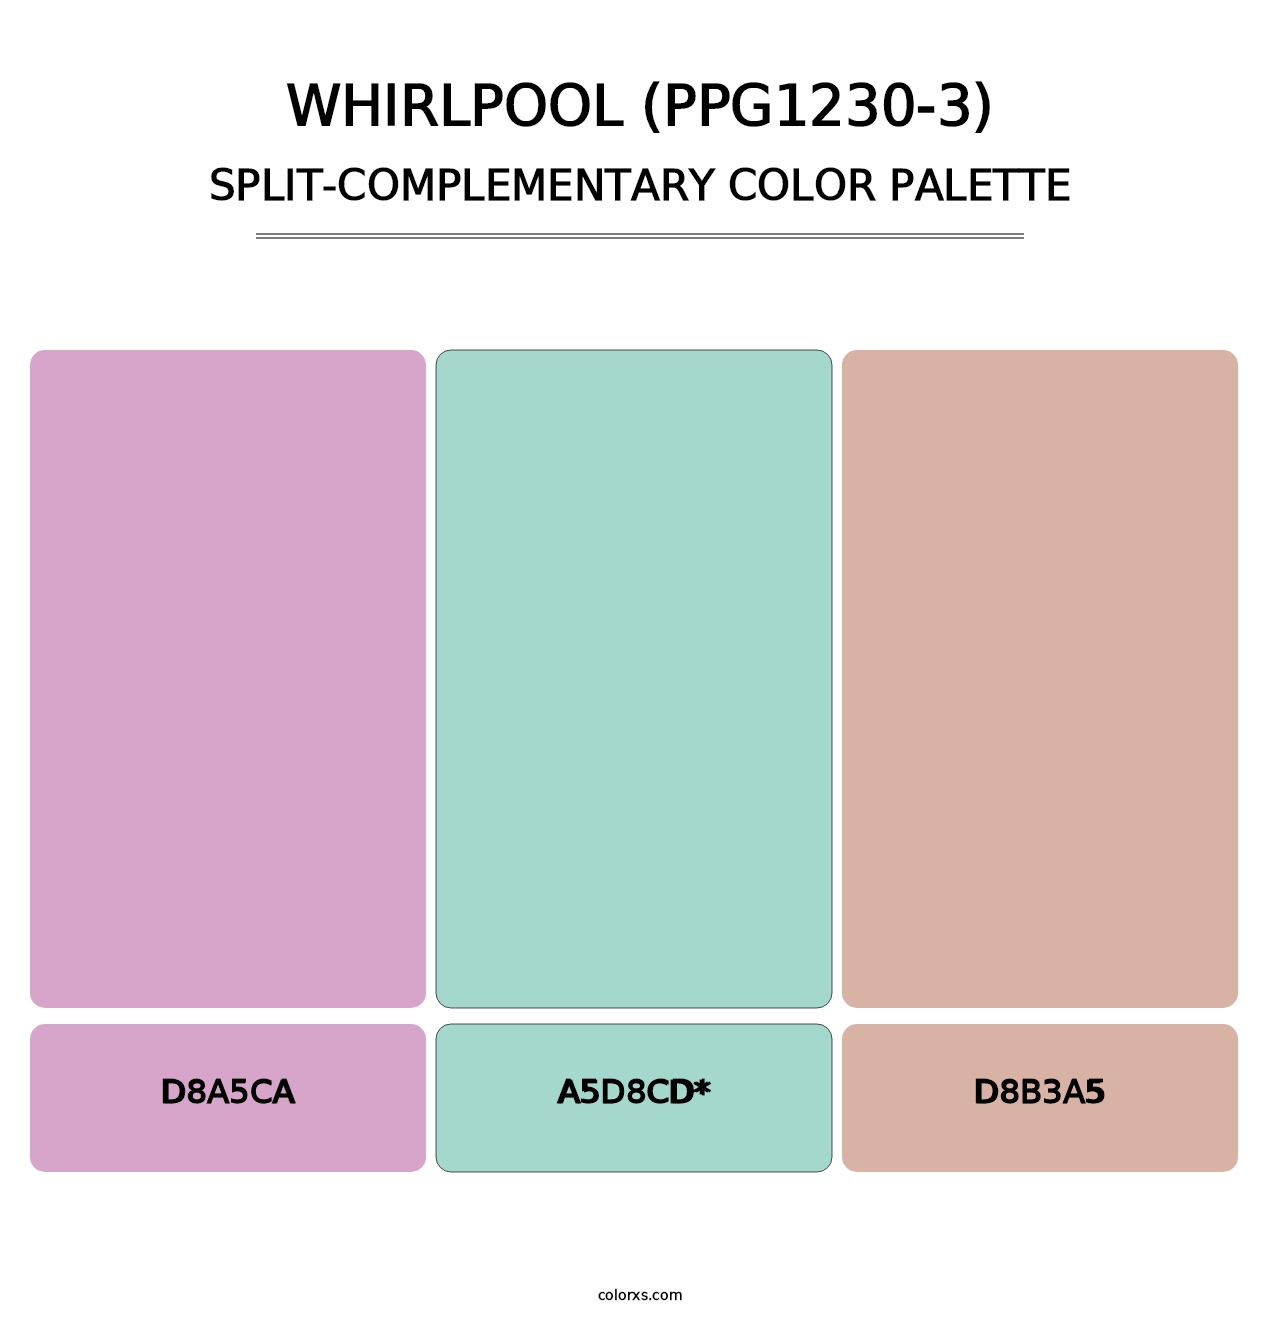 Whirlpool (PPG1230-3) - Split-Complementary Color Palette